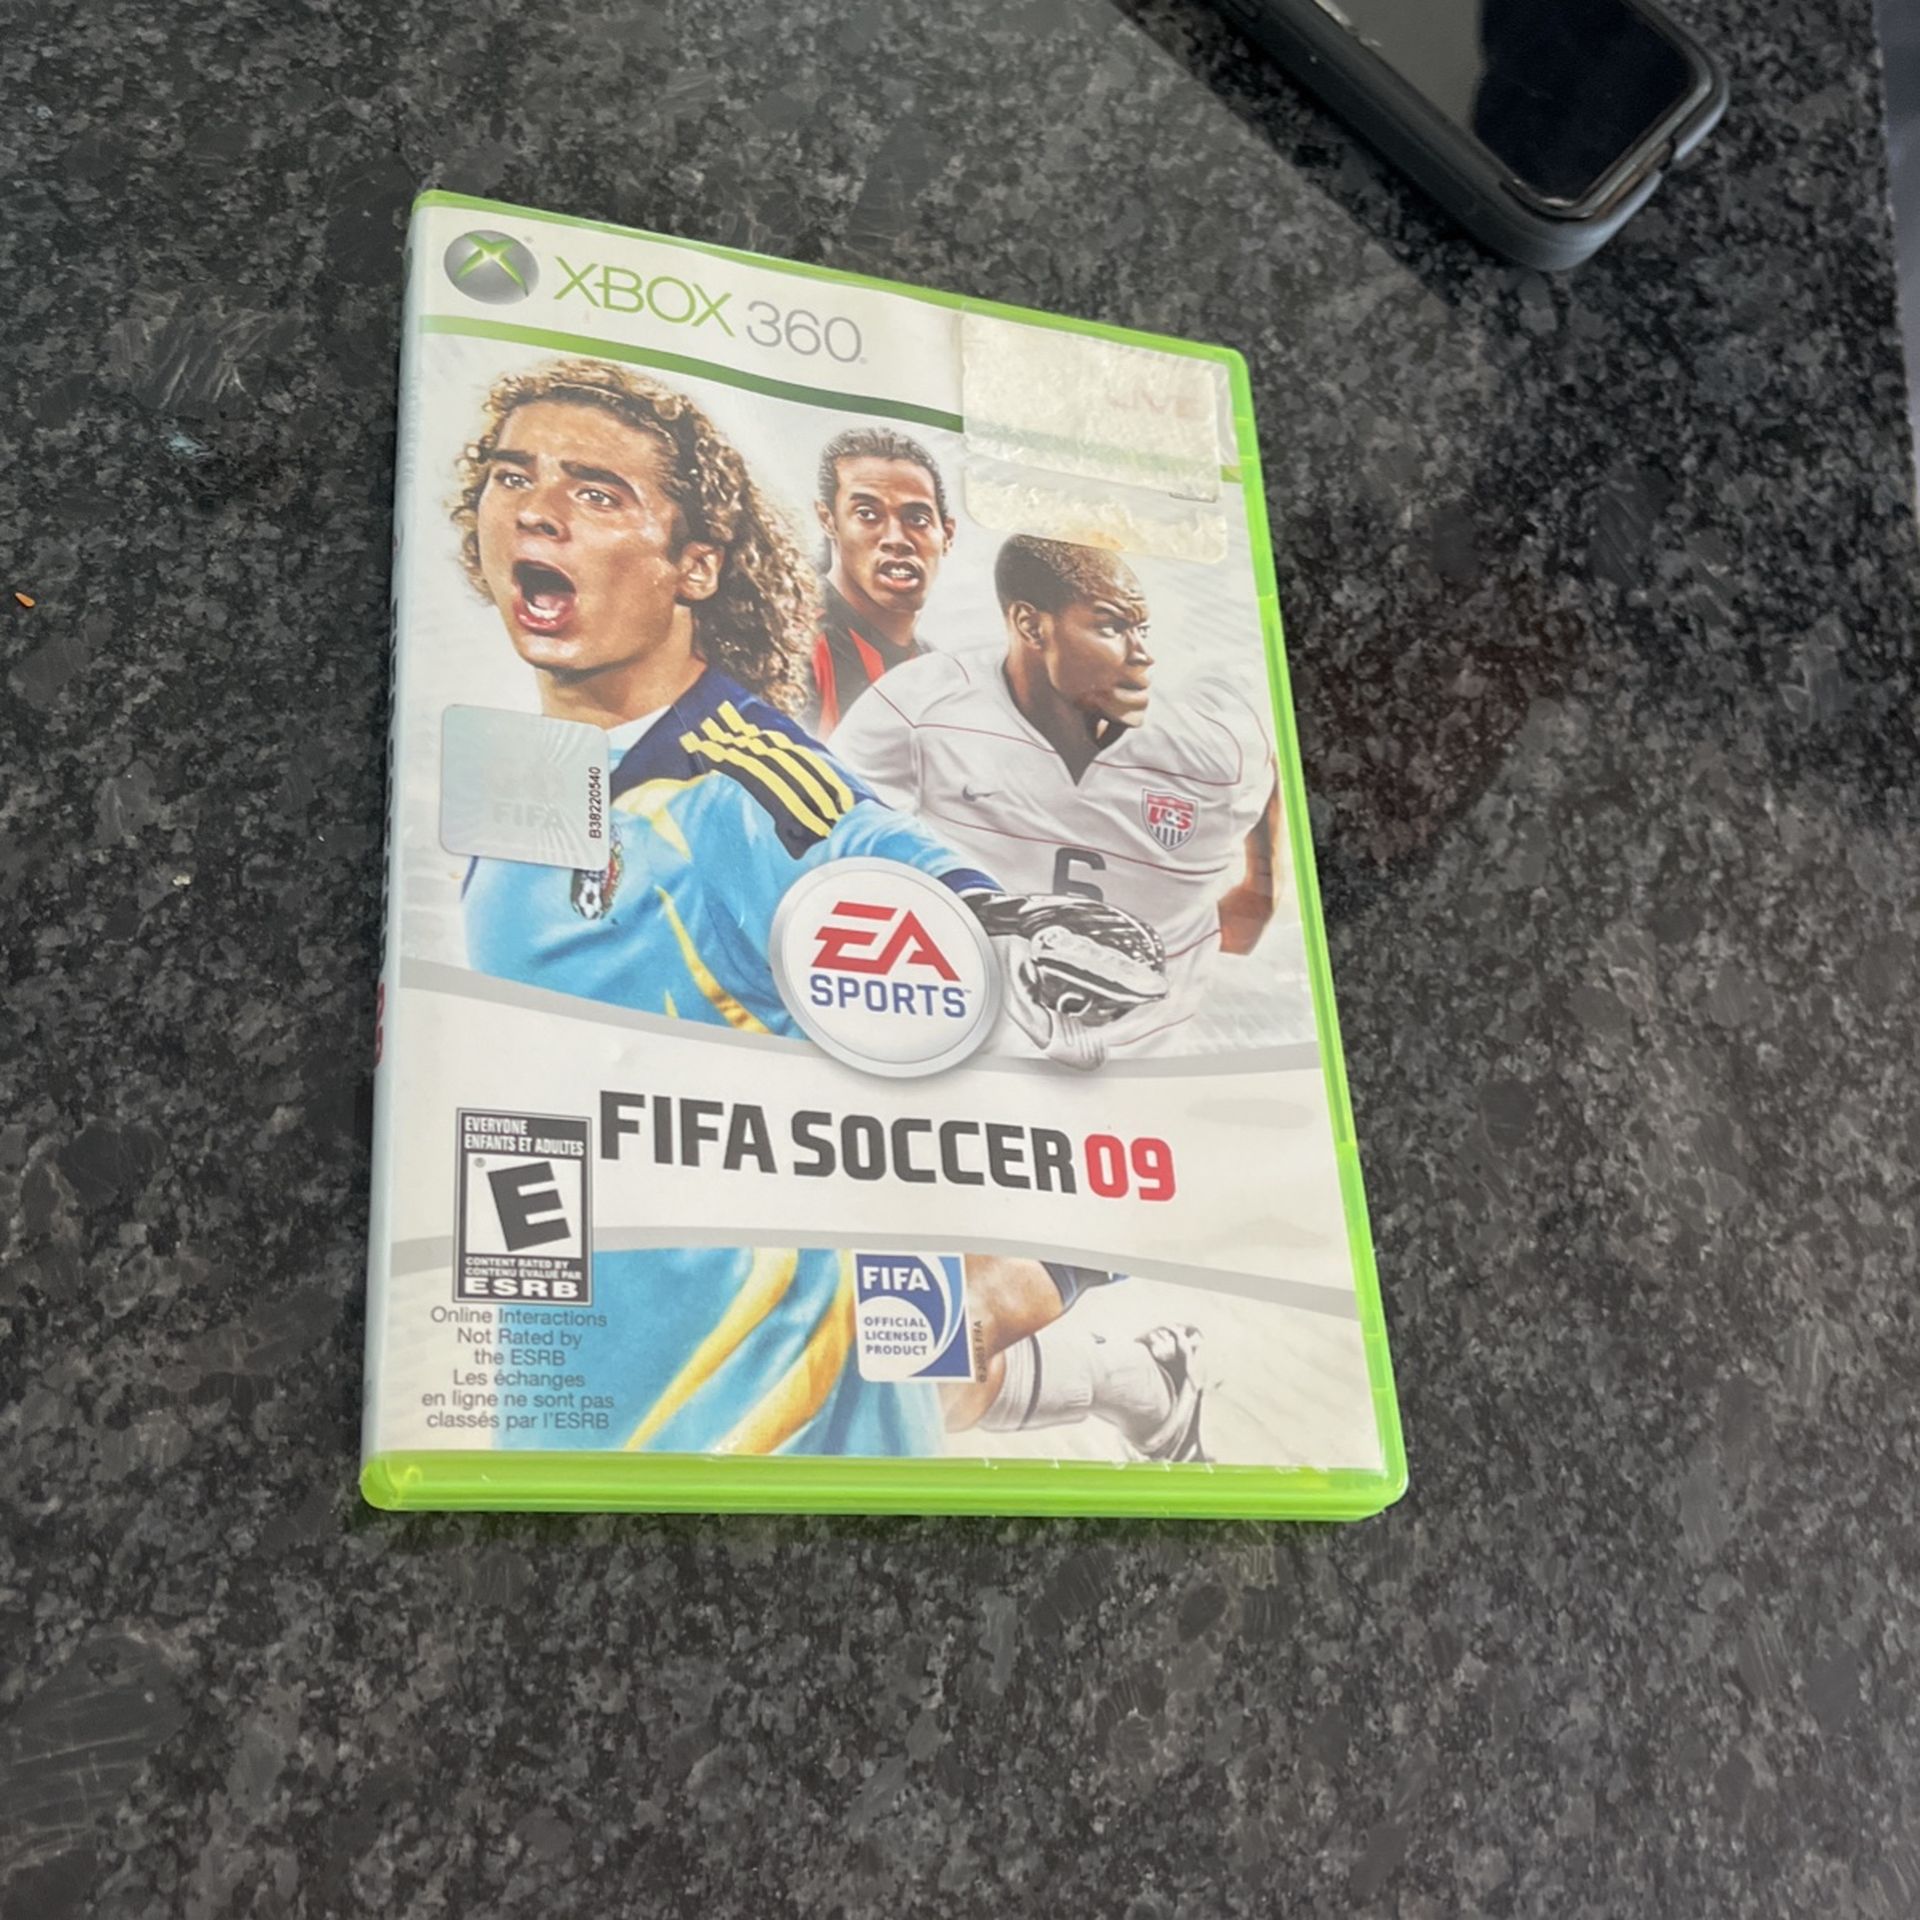 This Game Is For Xbox 360 And This FIFA Is Rare To Get Now Days.